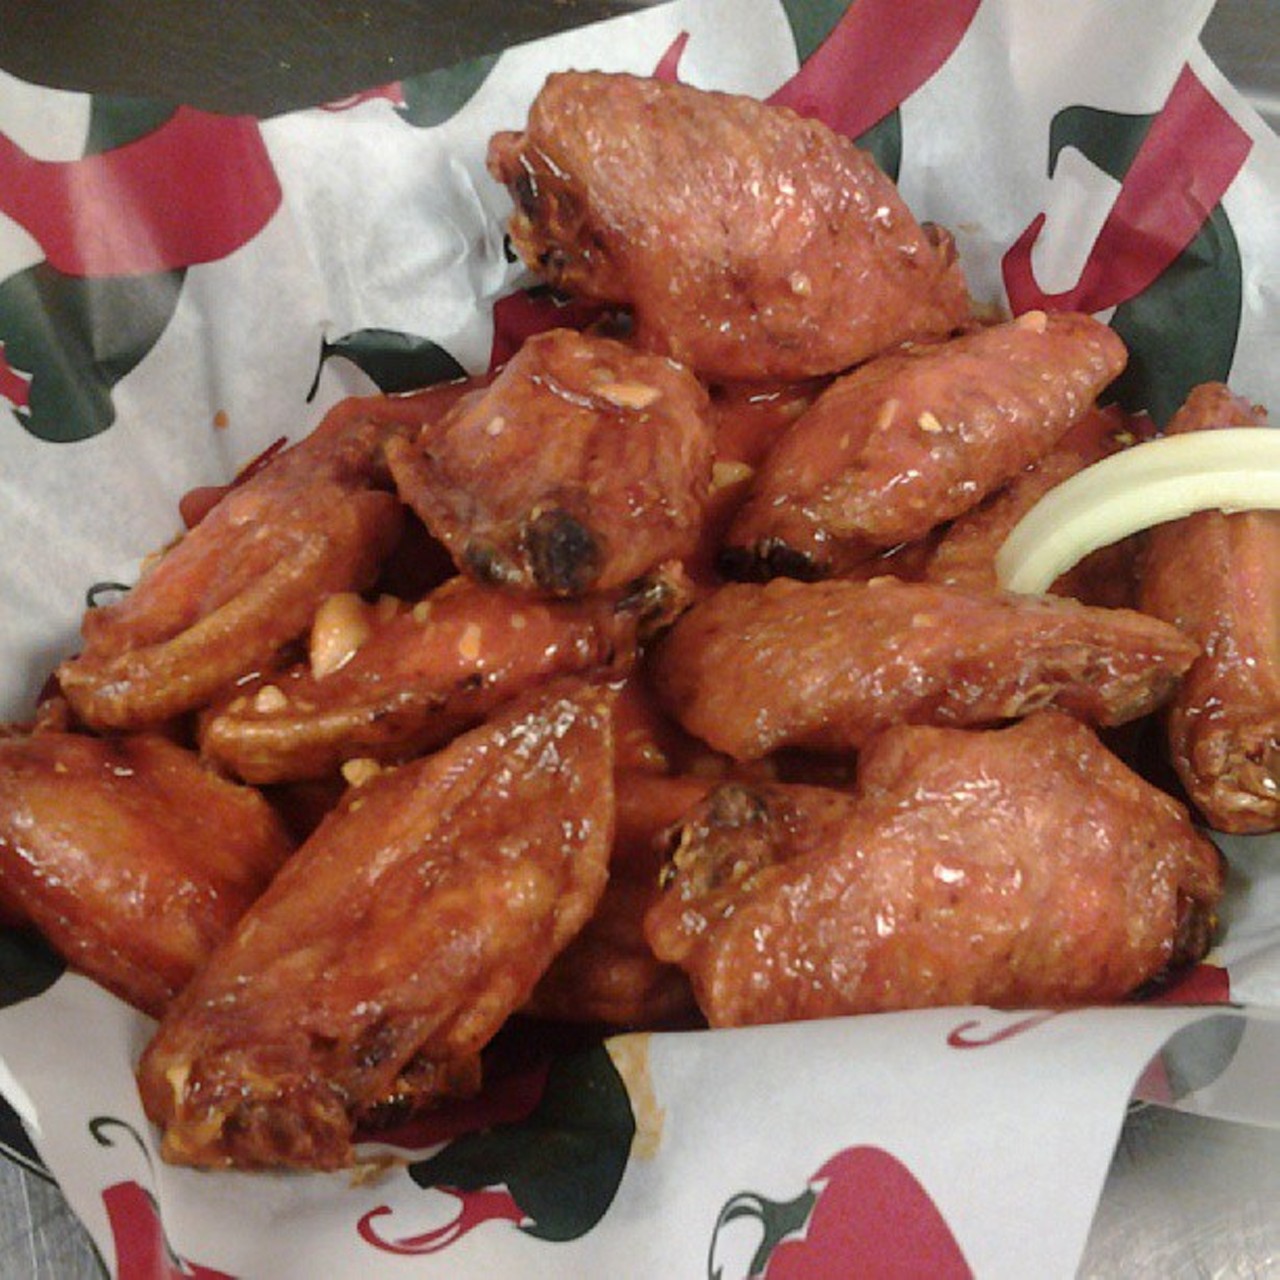 Its Wing Wednesday at the Tavern! Half off wings from 6-close! #nofilter #Wednesdaywings #solon #clevelandfood